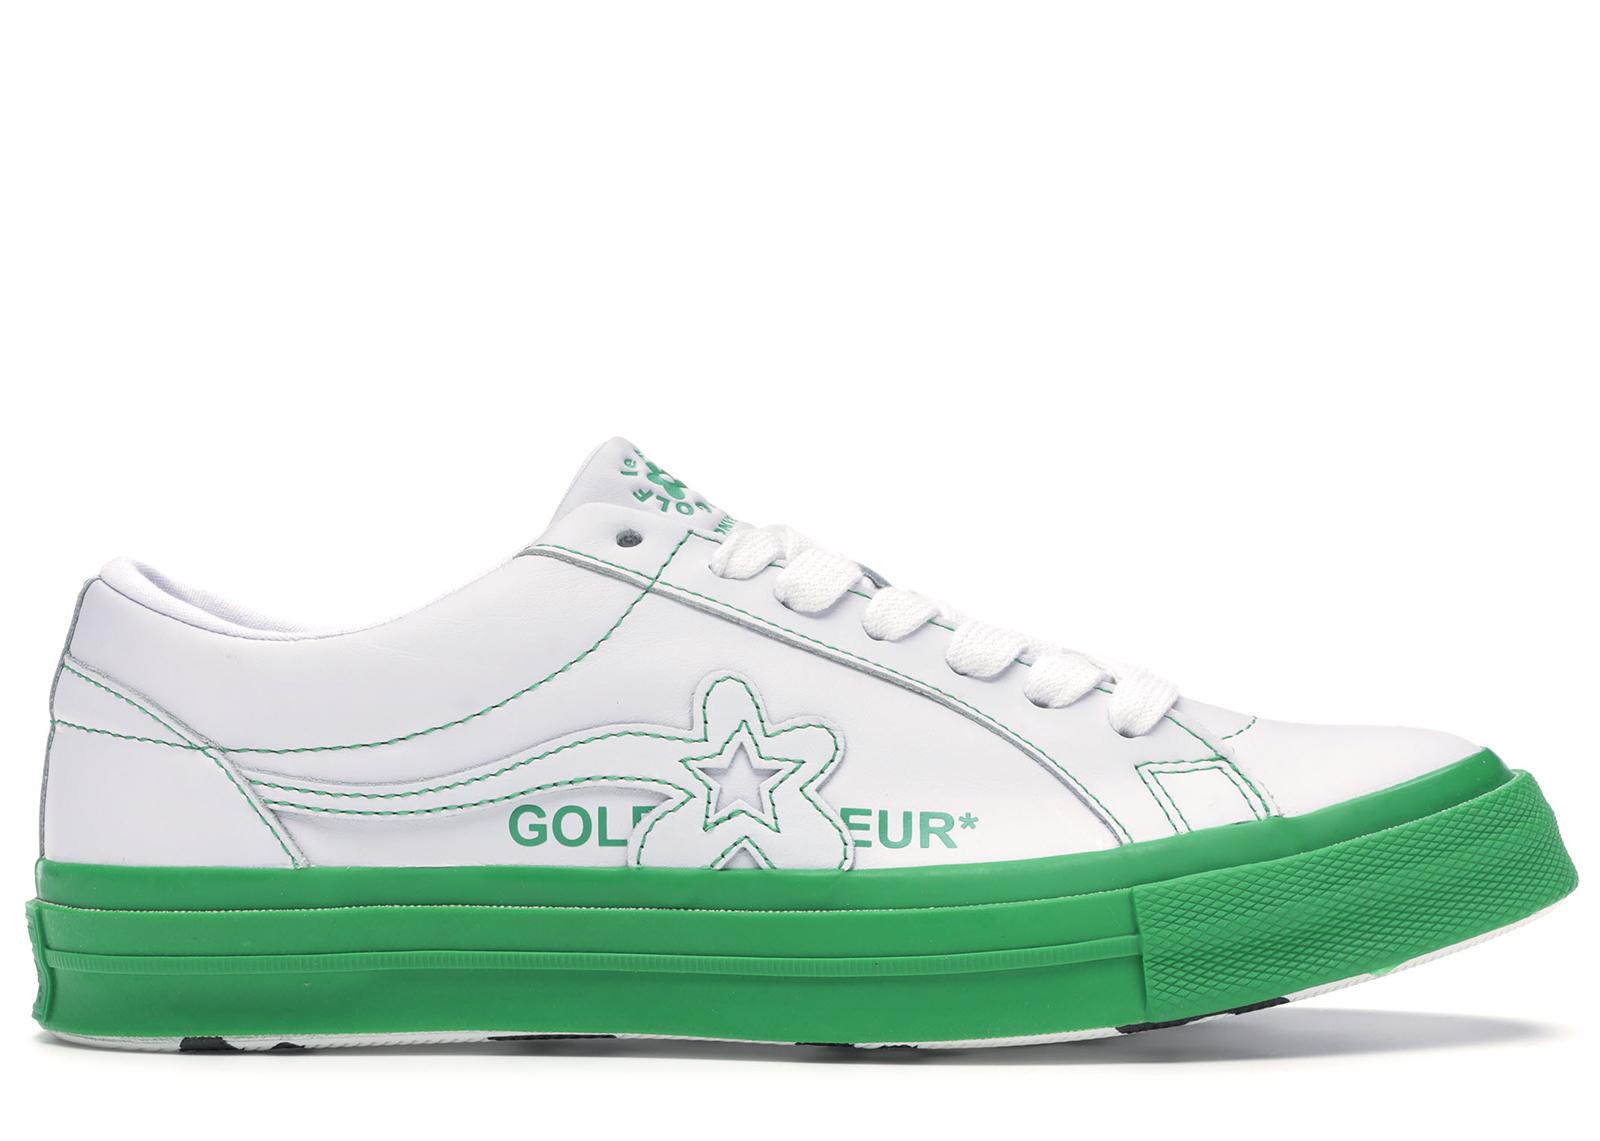 Converse One Star Ox Golf Le Fleur Color Block Pack Green for Men - Lyst